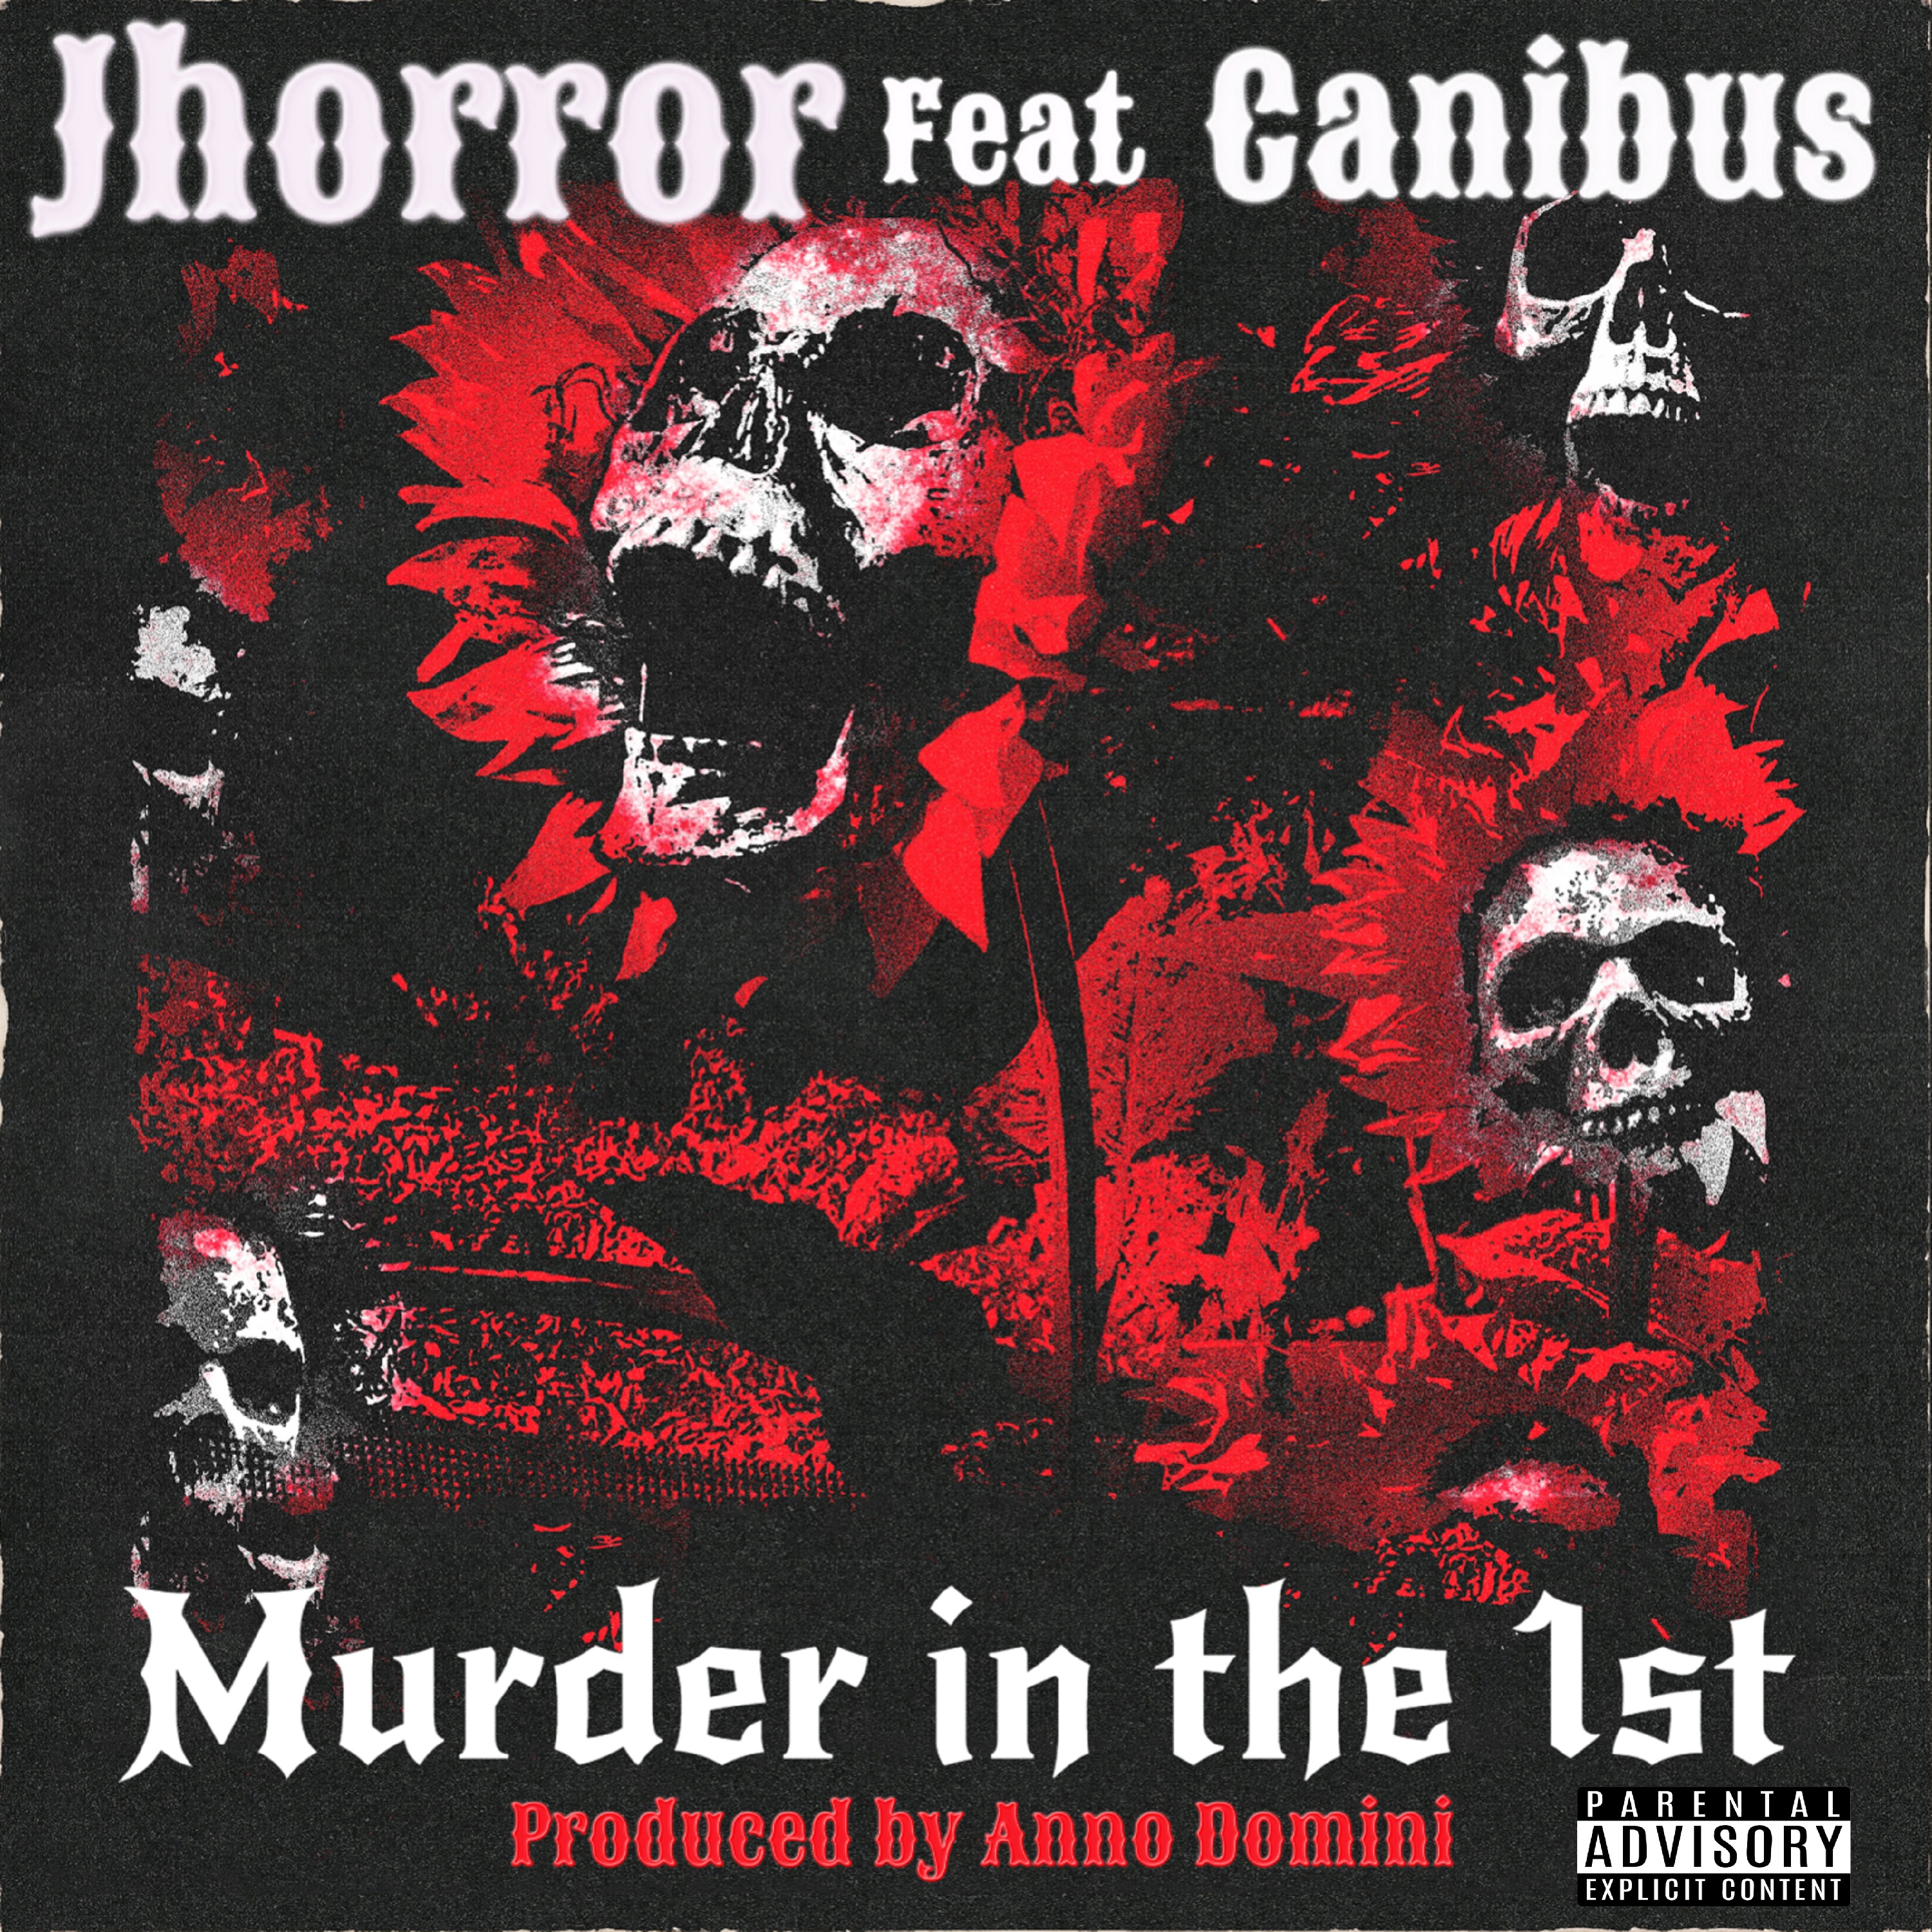 Art for Murder in the 1st by J horror Feat. Canibus